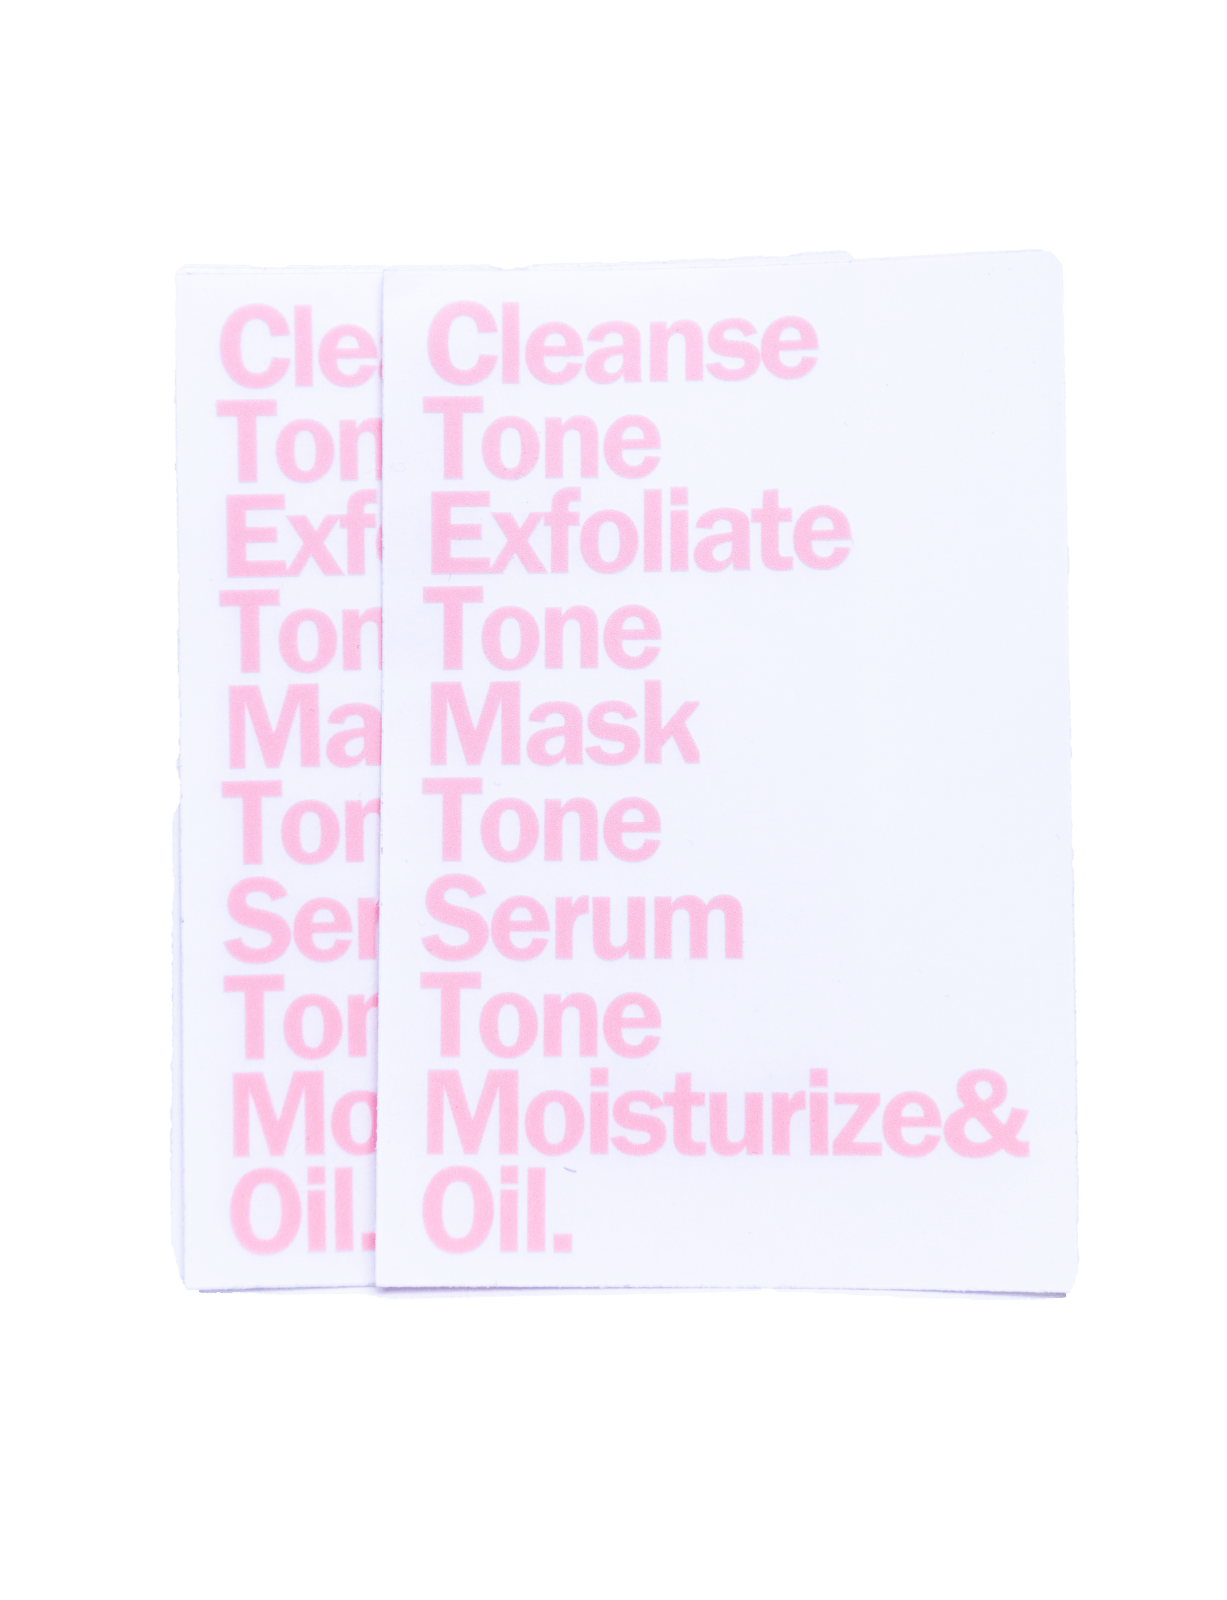 Skin Care Routine Stickers - SHOP LABeautyologist